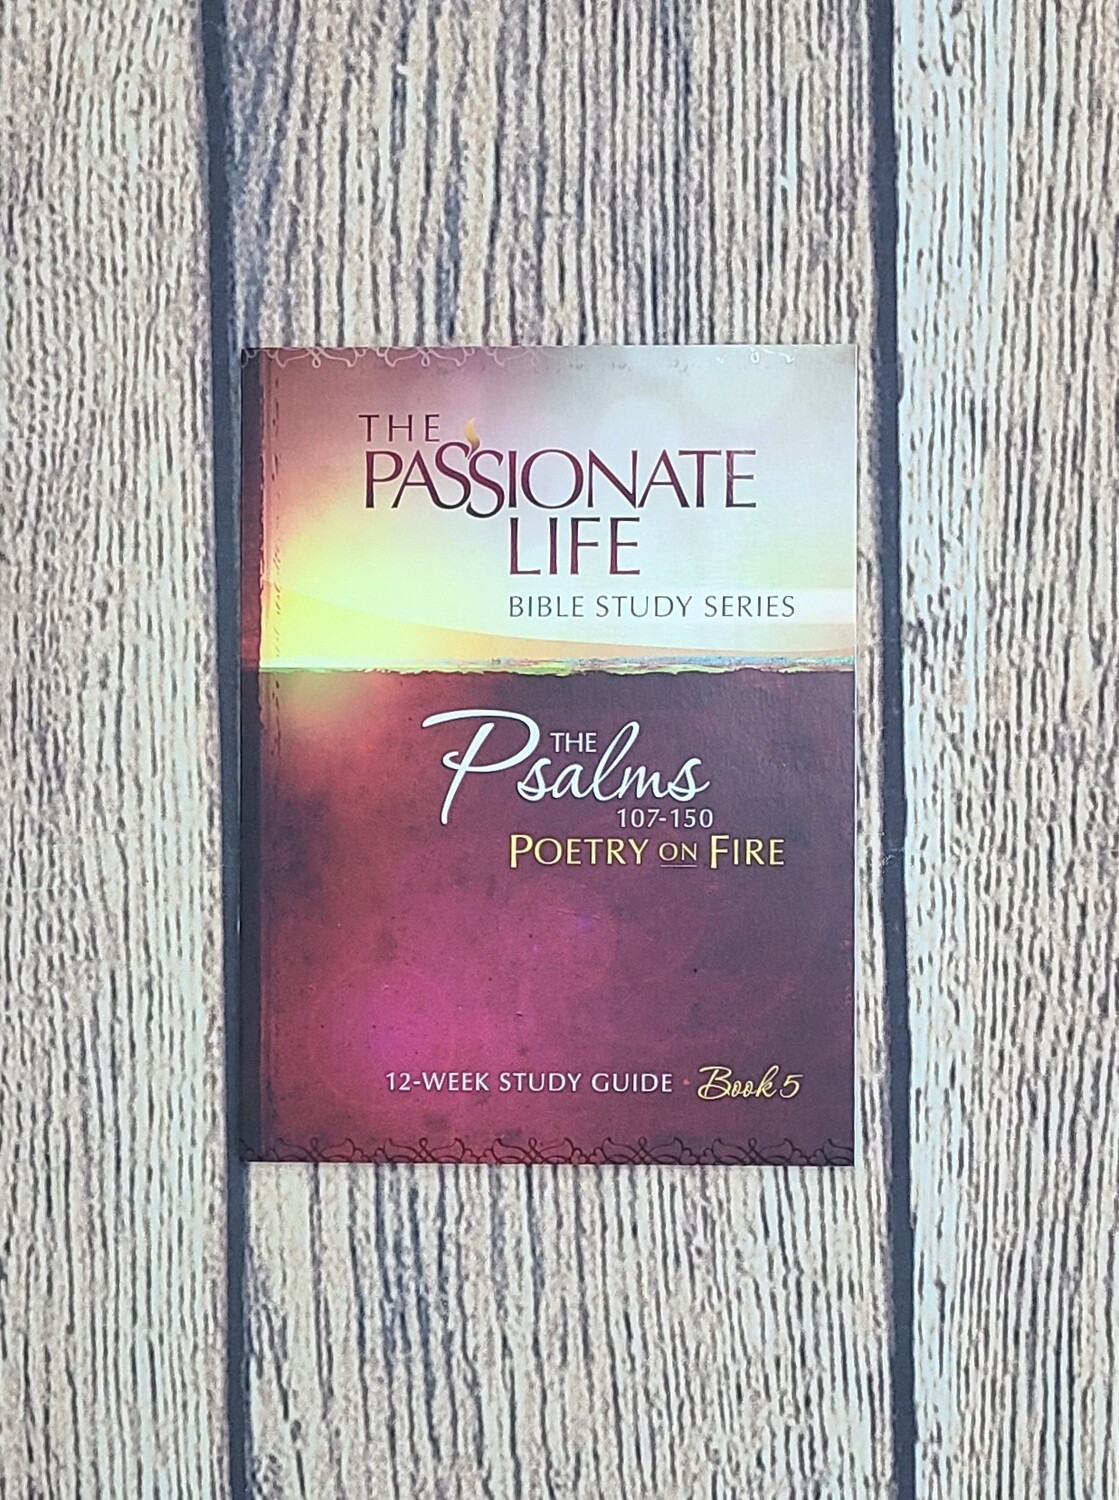 The Passionate Life Bible Study Series: The Psalmes 107-150 Poetry on Fire 12-Week Study Guide - Book 5 by Jeremy Bouma